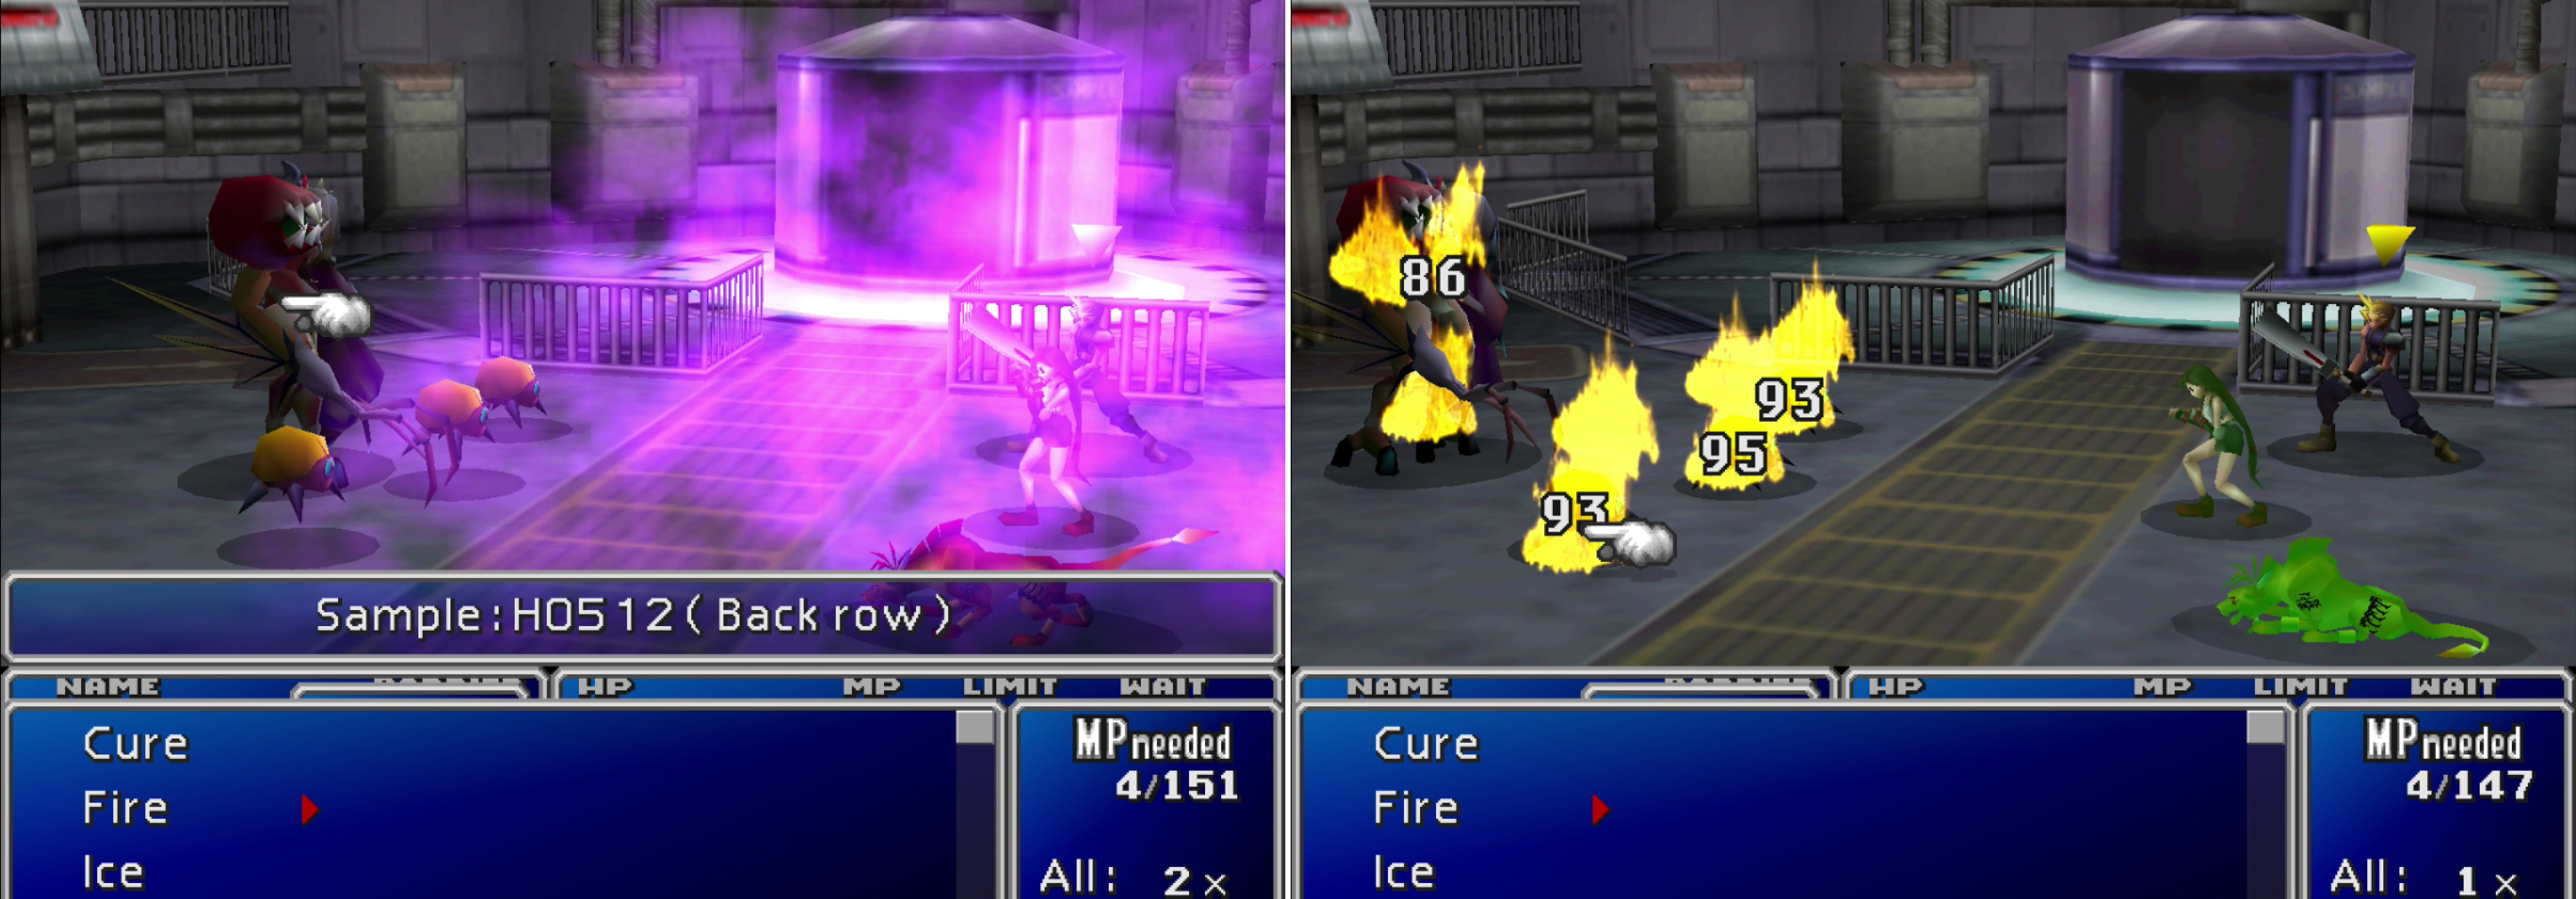 Sample HO512’s “Shady Breath” attack can poison the entire party if they’re not protect with a Star Pendant or Elemental Materia (left). Using magic to strike all your foes - or to harm Sample HO512 while bypassing its undelrings - is a good idea (right).